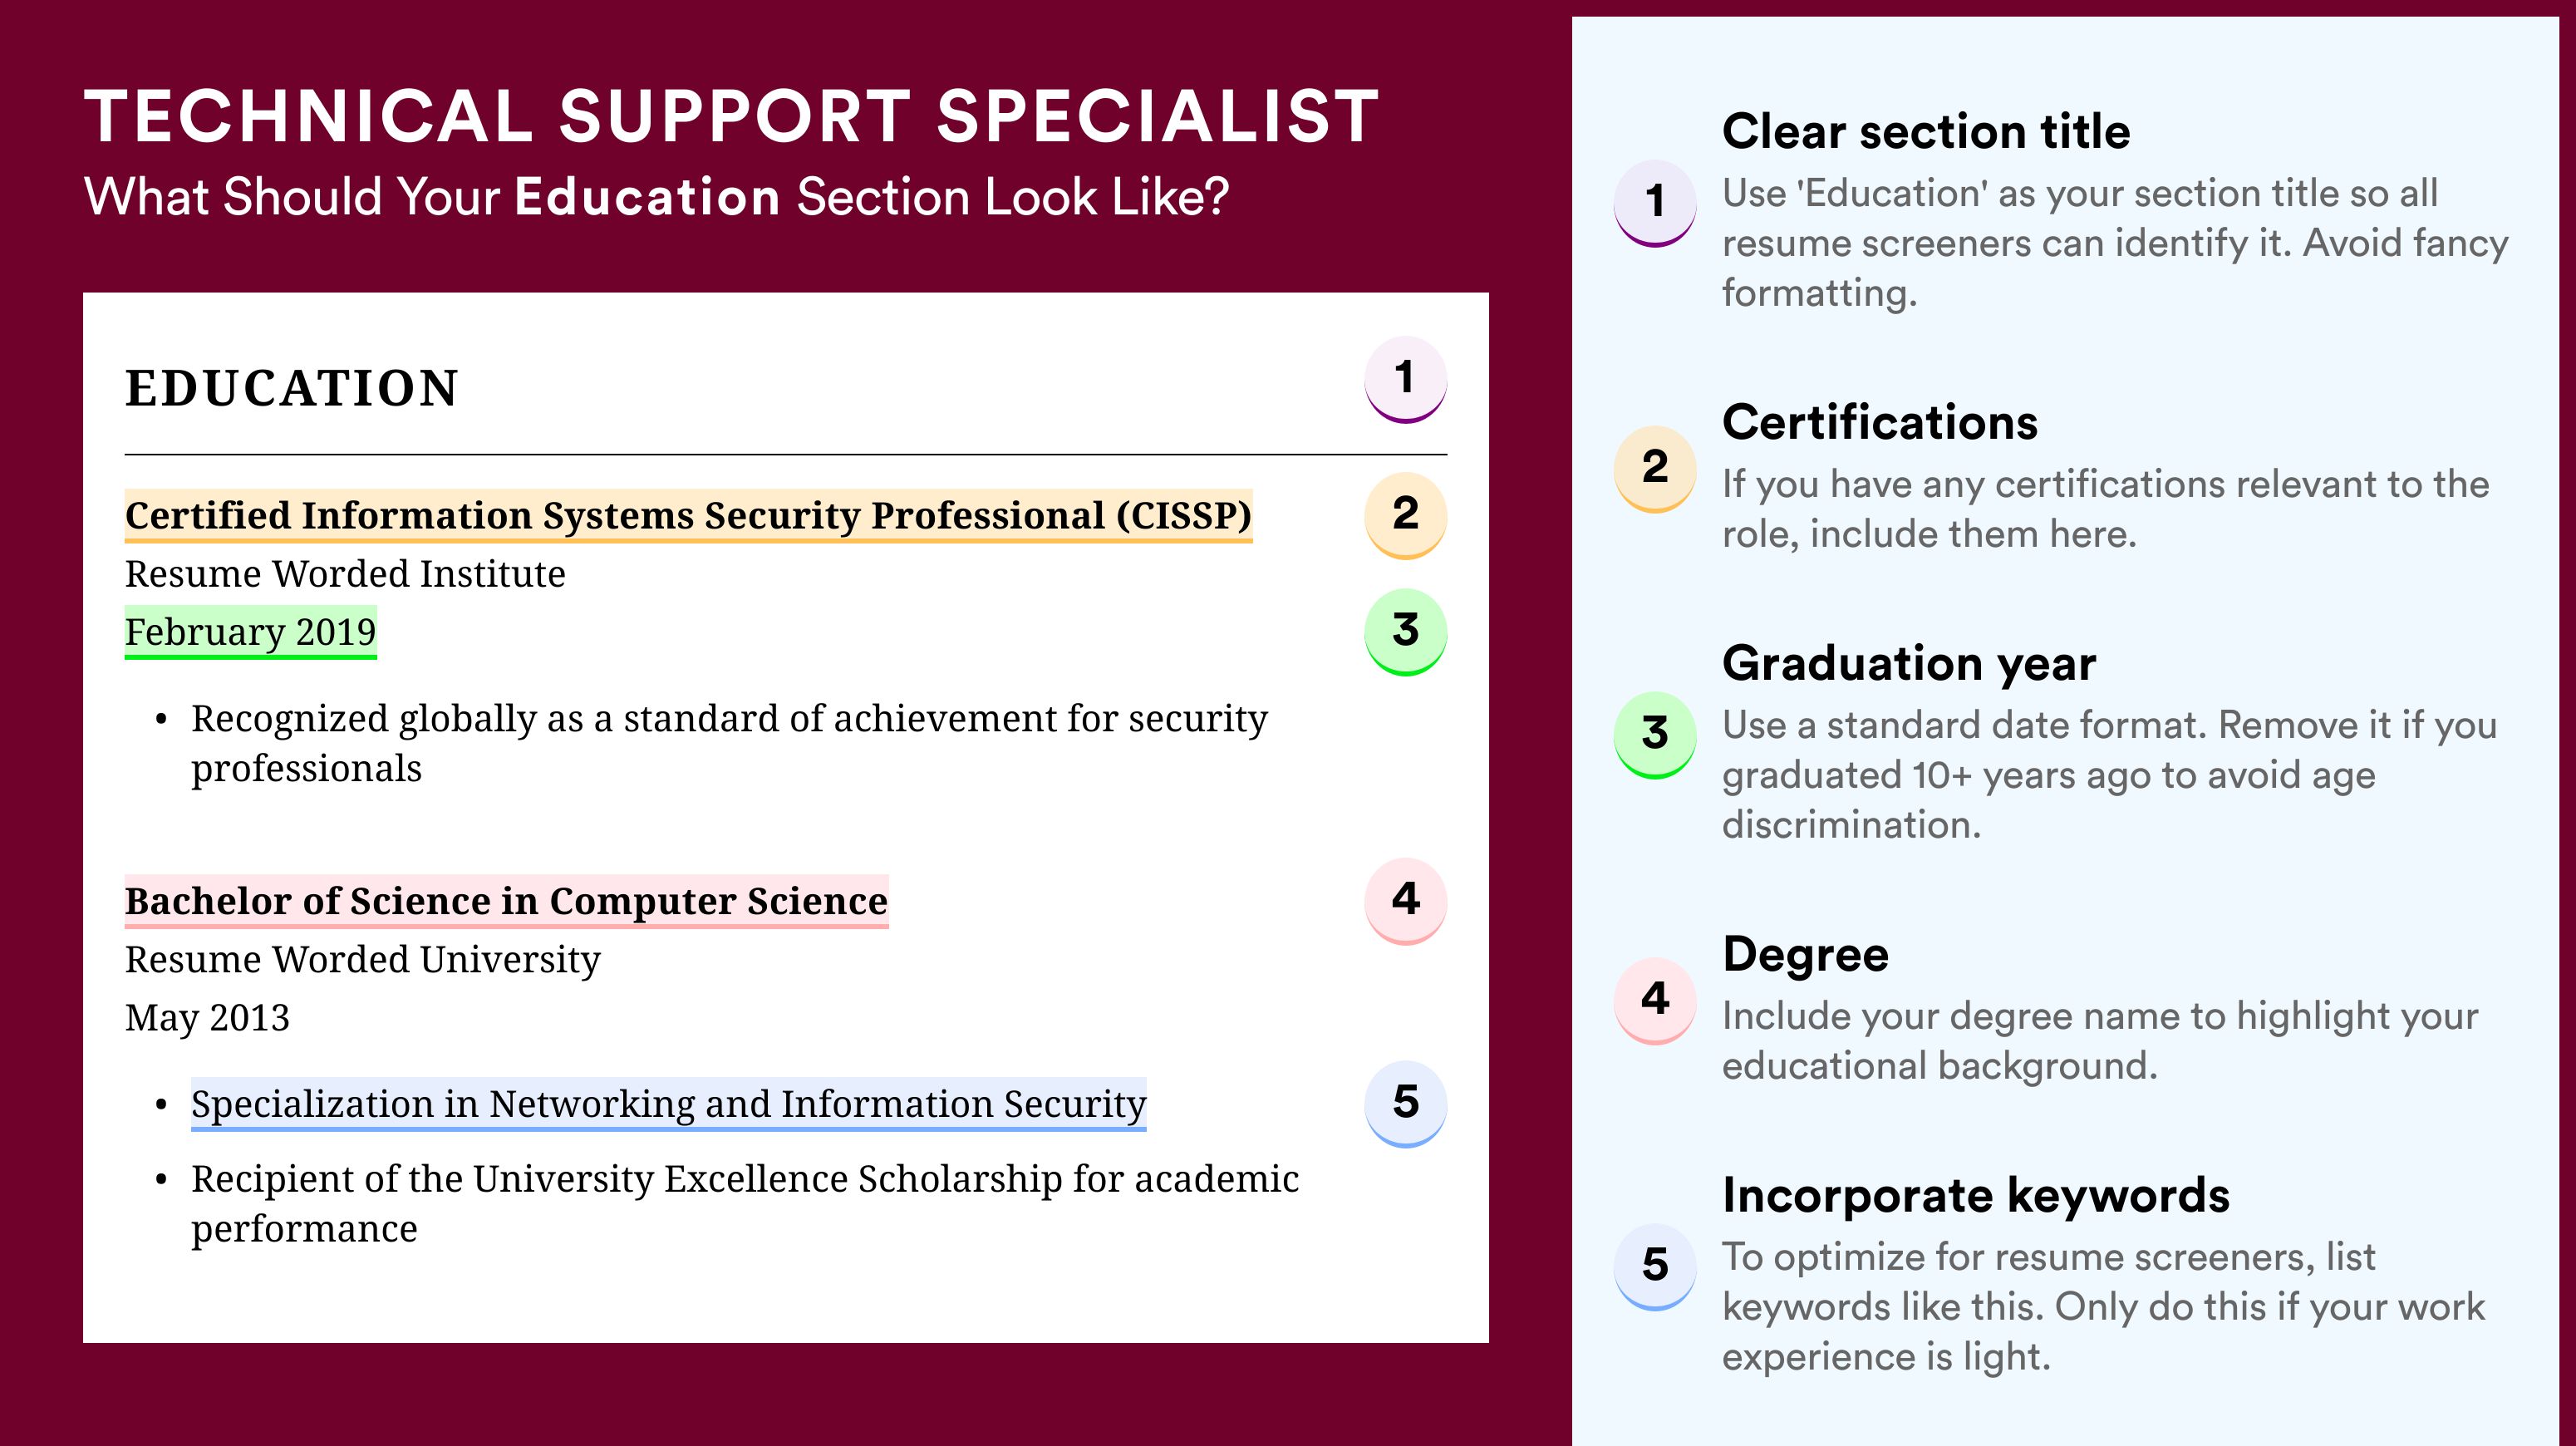 How To Write An Education Section - Technical Support Specialist Roles